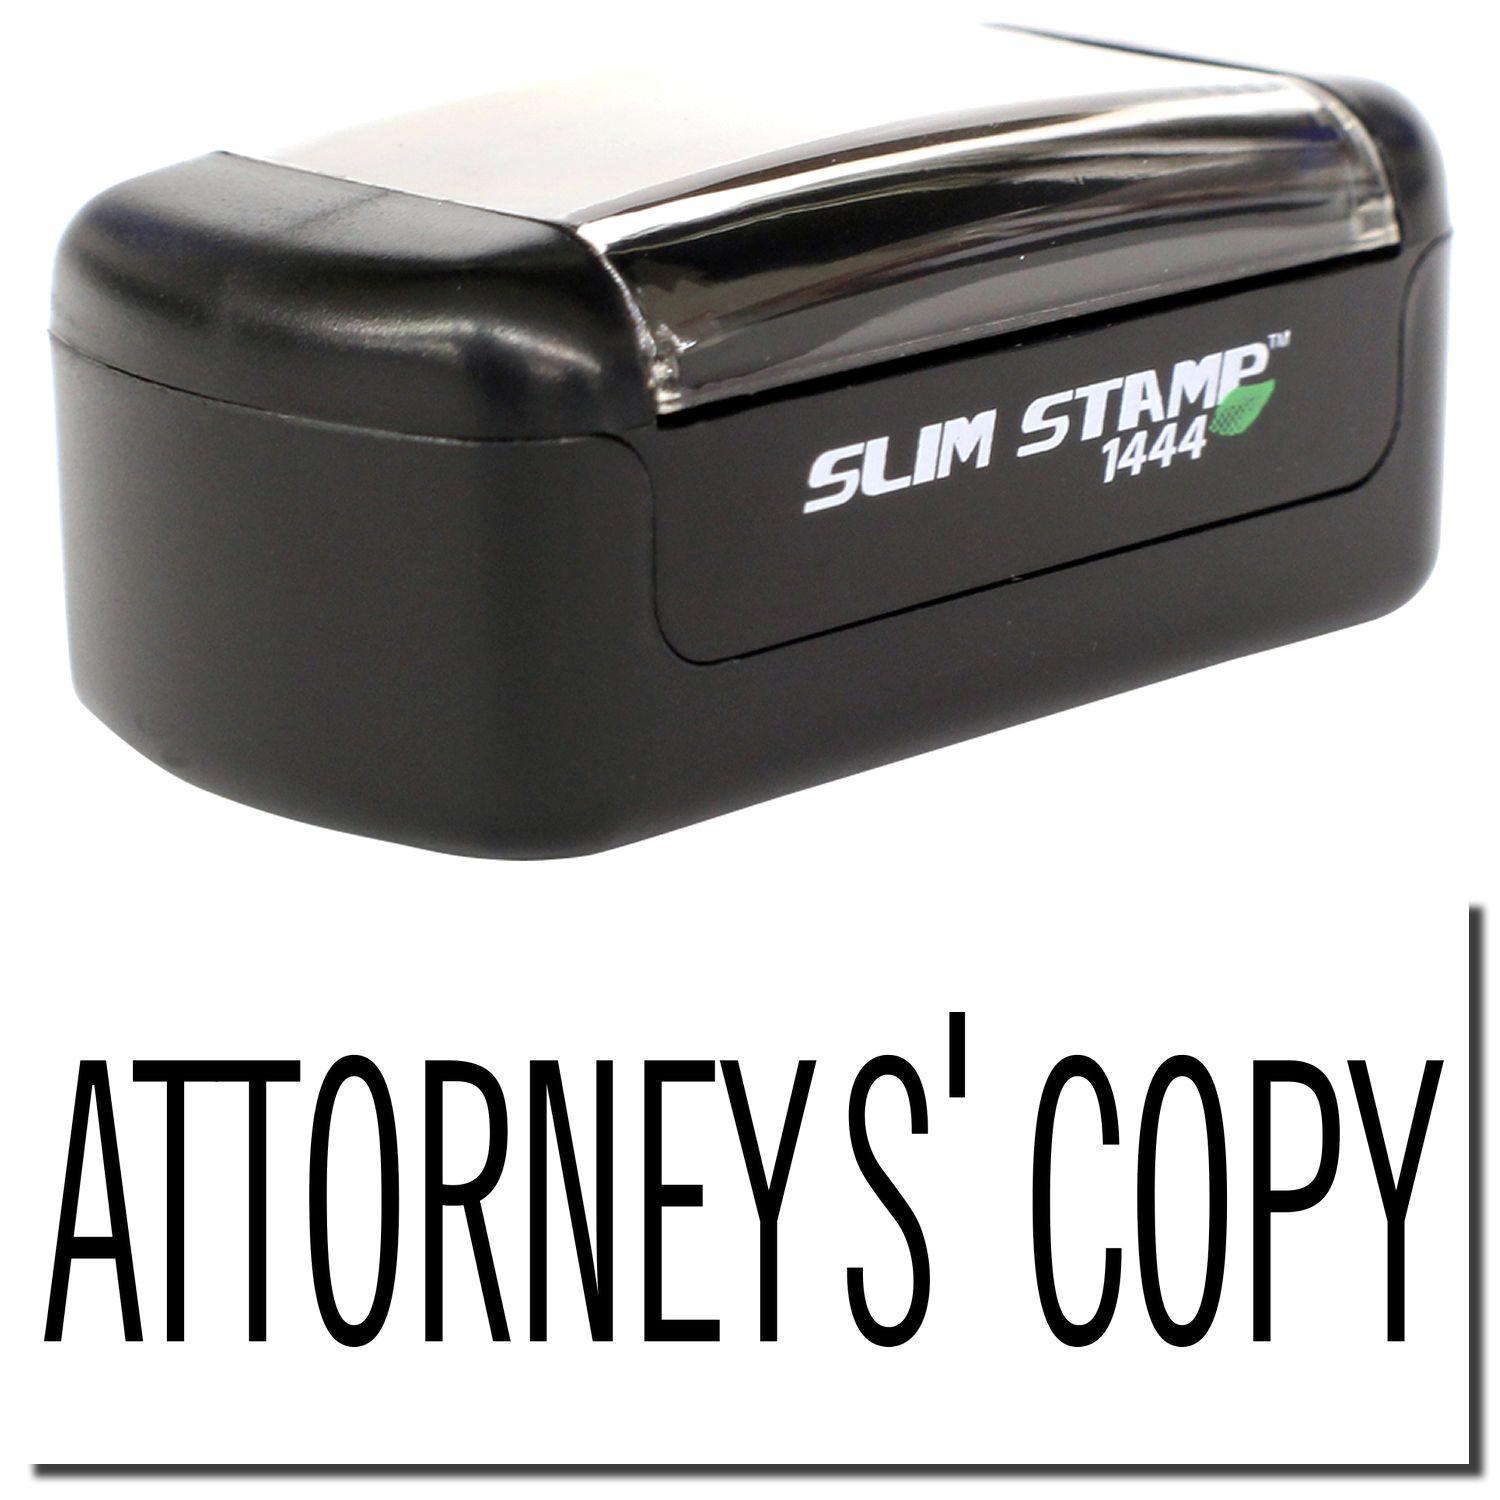 A stock office pre-inked stamp with a stamped image showing how the text "ATTORNEYS' COPY" is displayed after stamping.